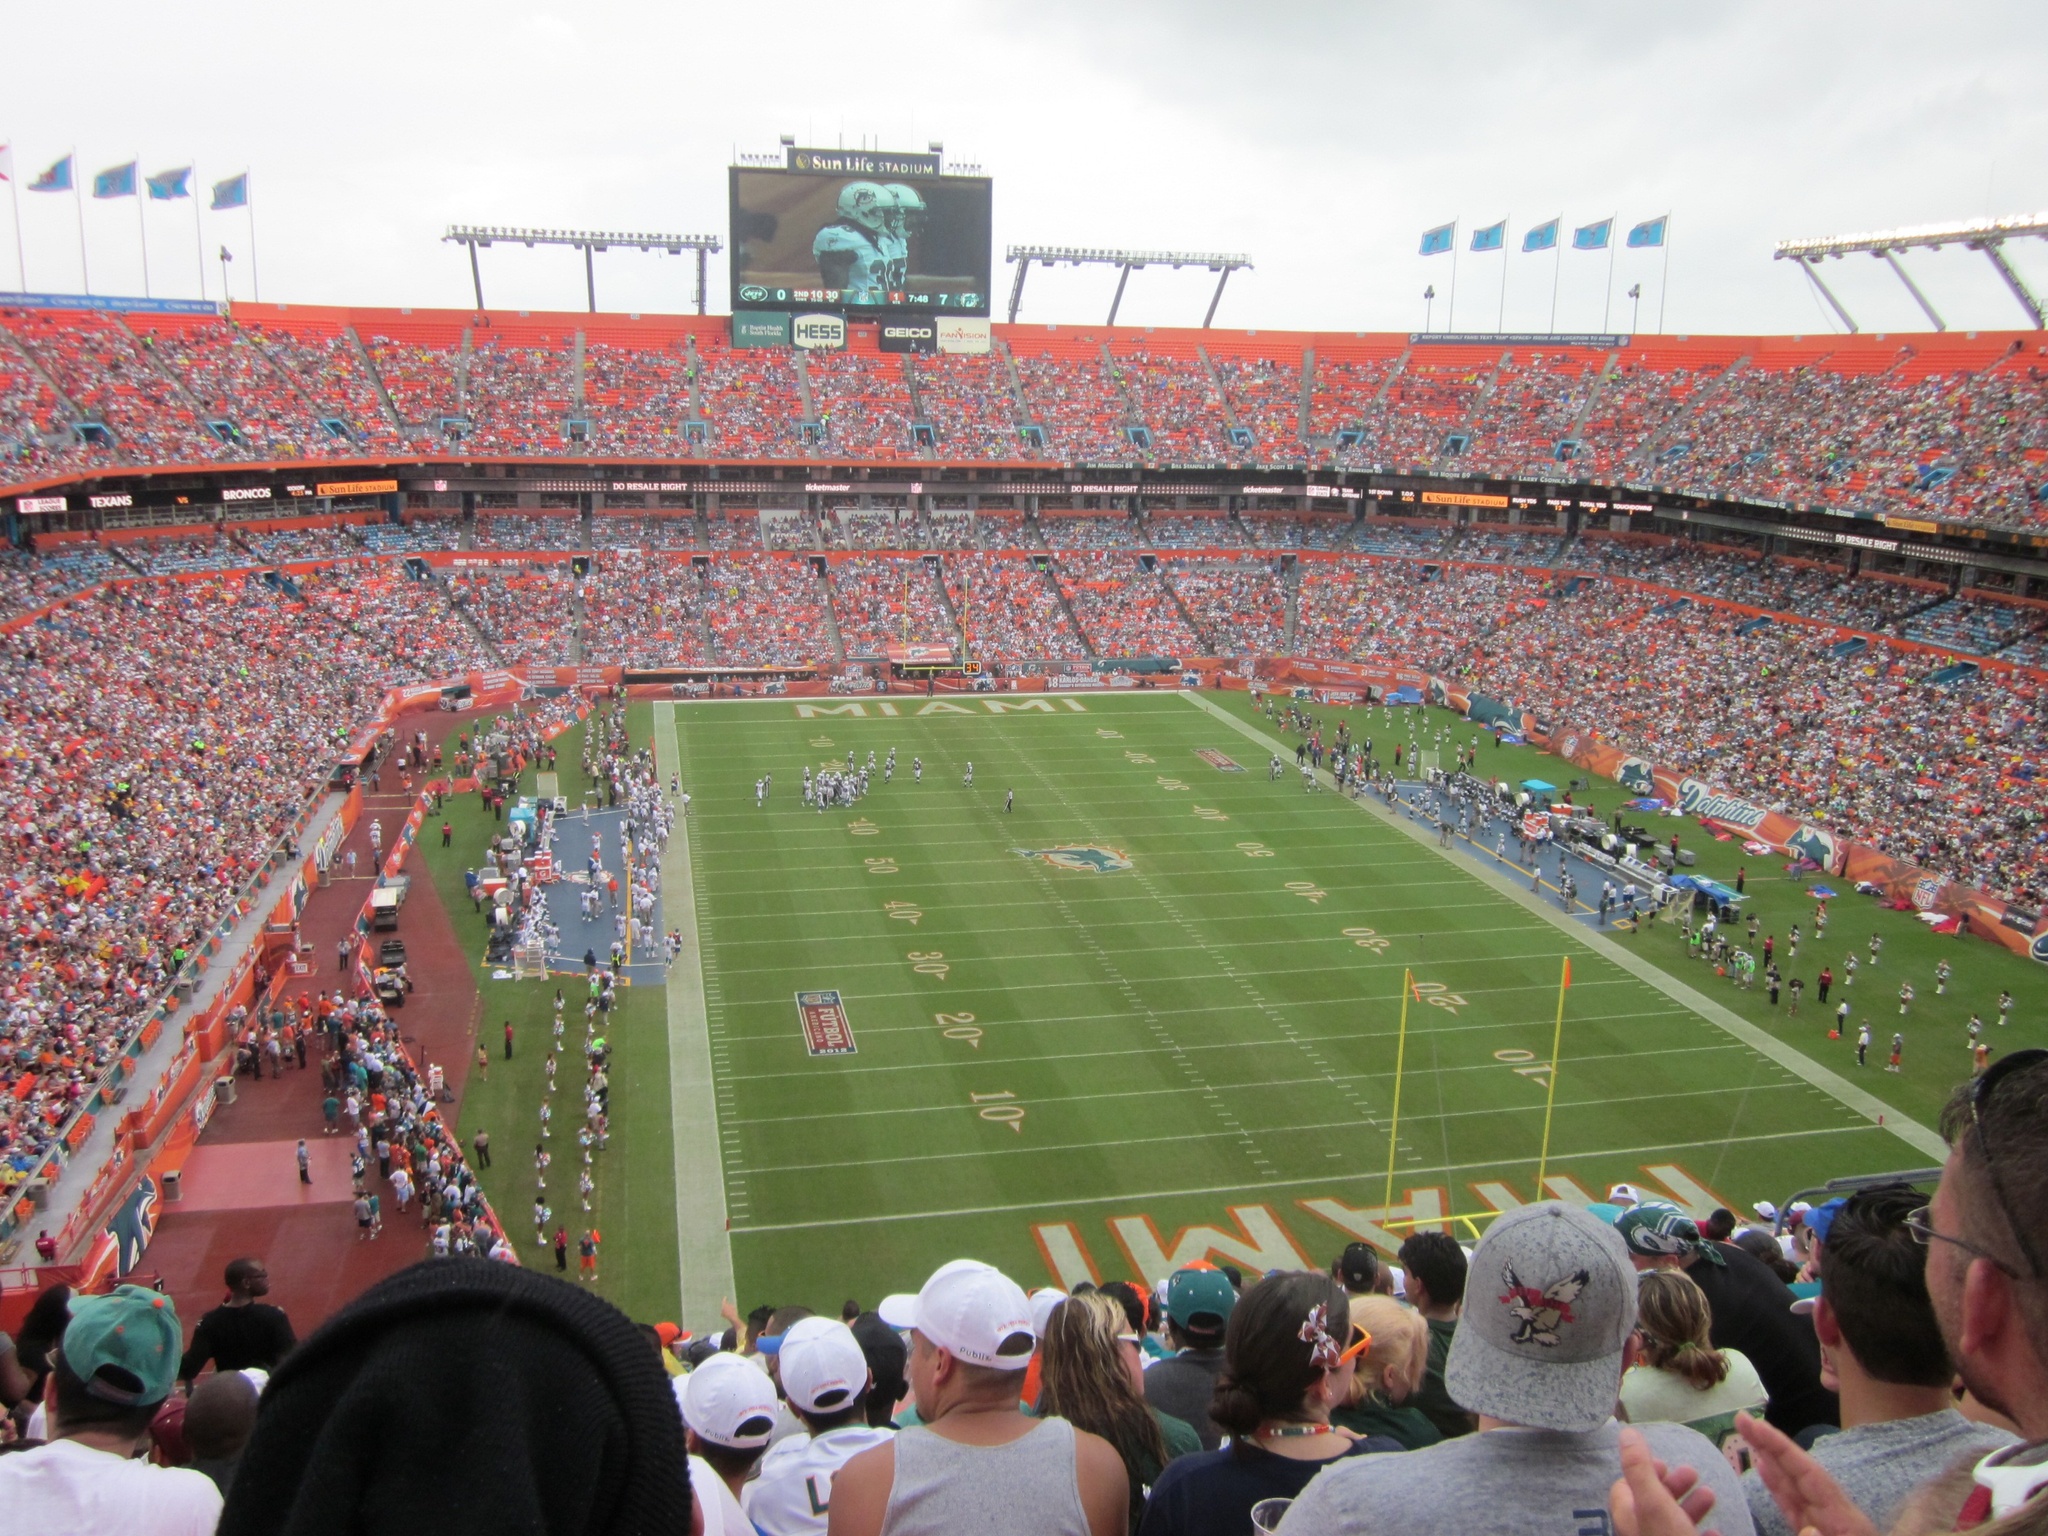 A crowd in a stadium watching a football game